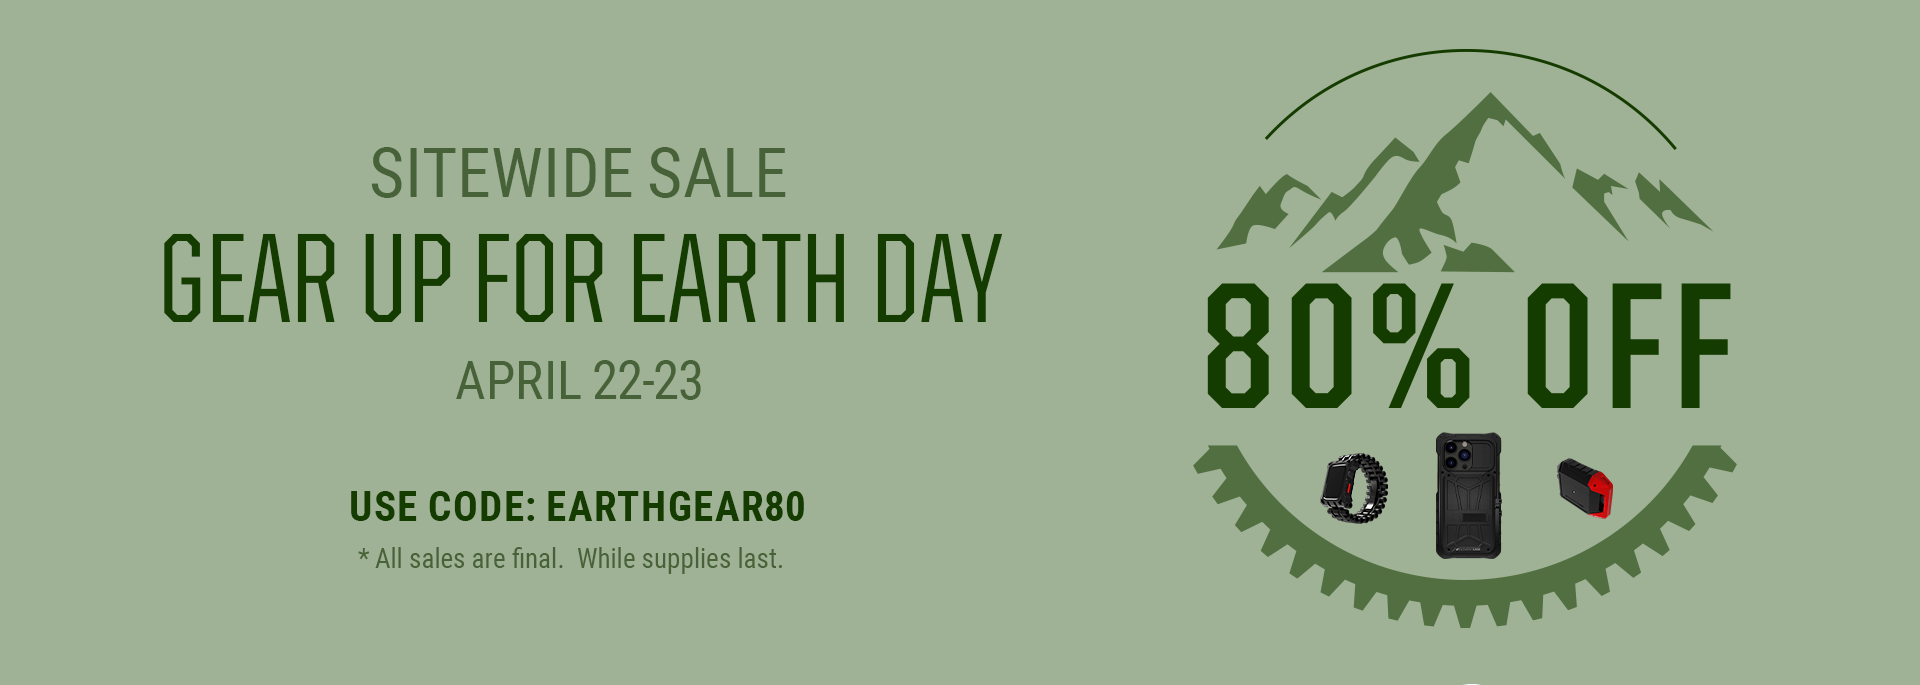 80% Off Sitewide Use Code: EARTHGEAR80 | April 22-23